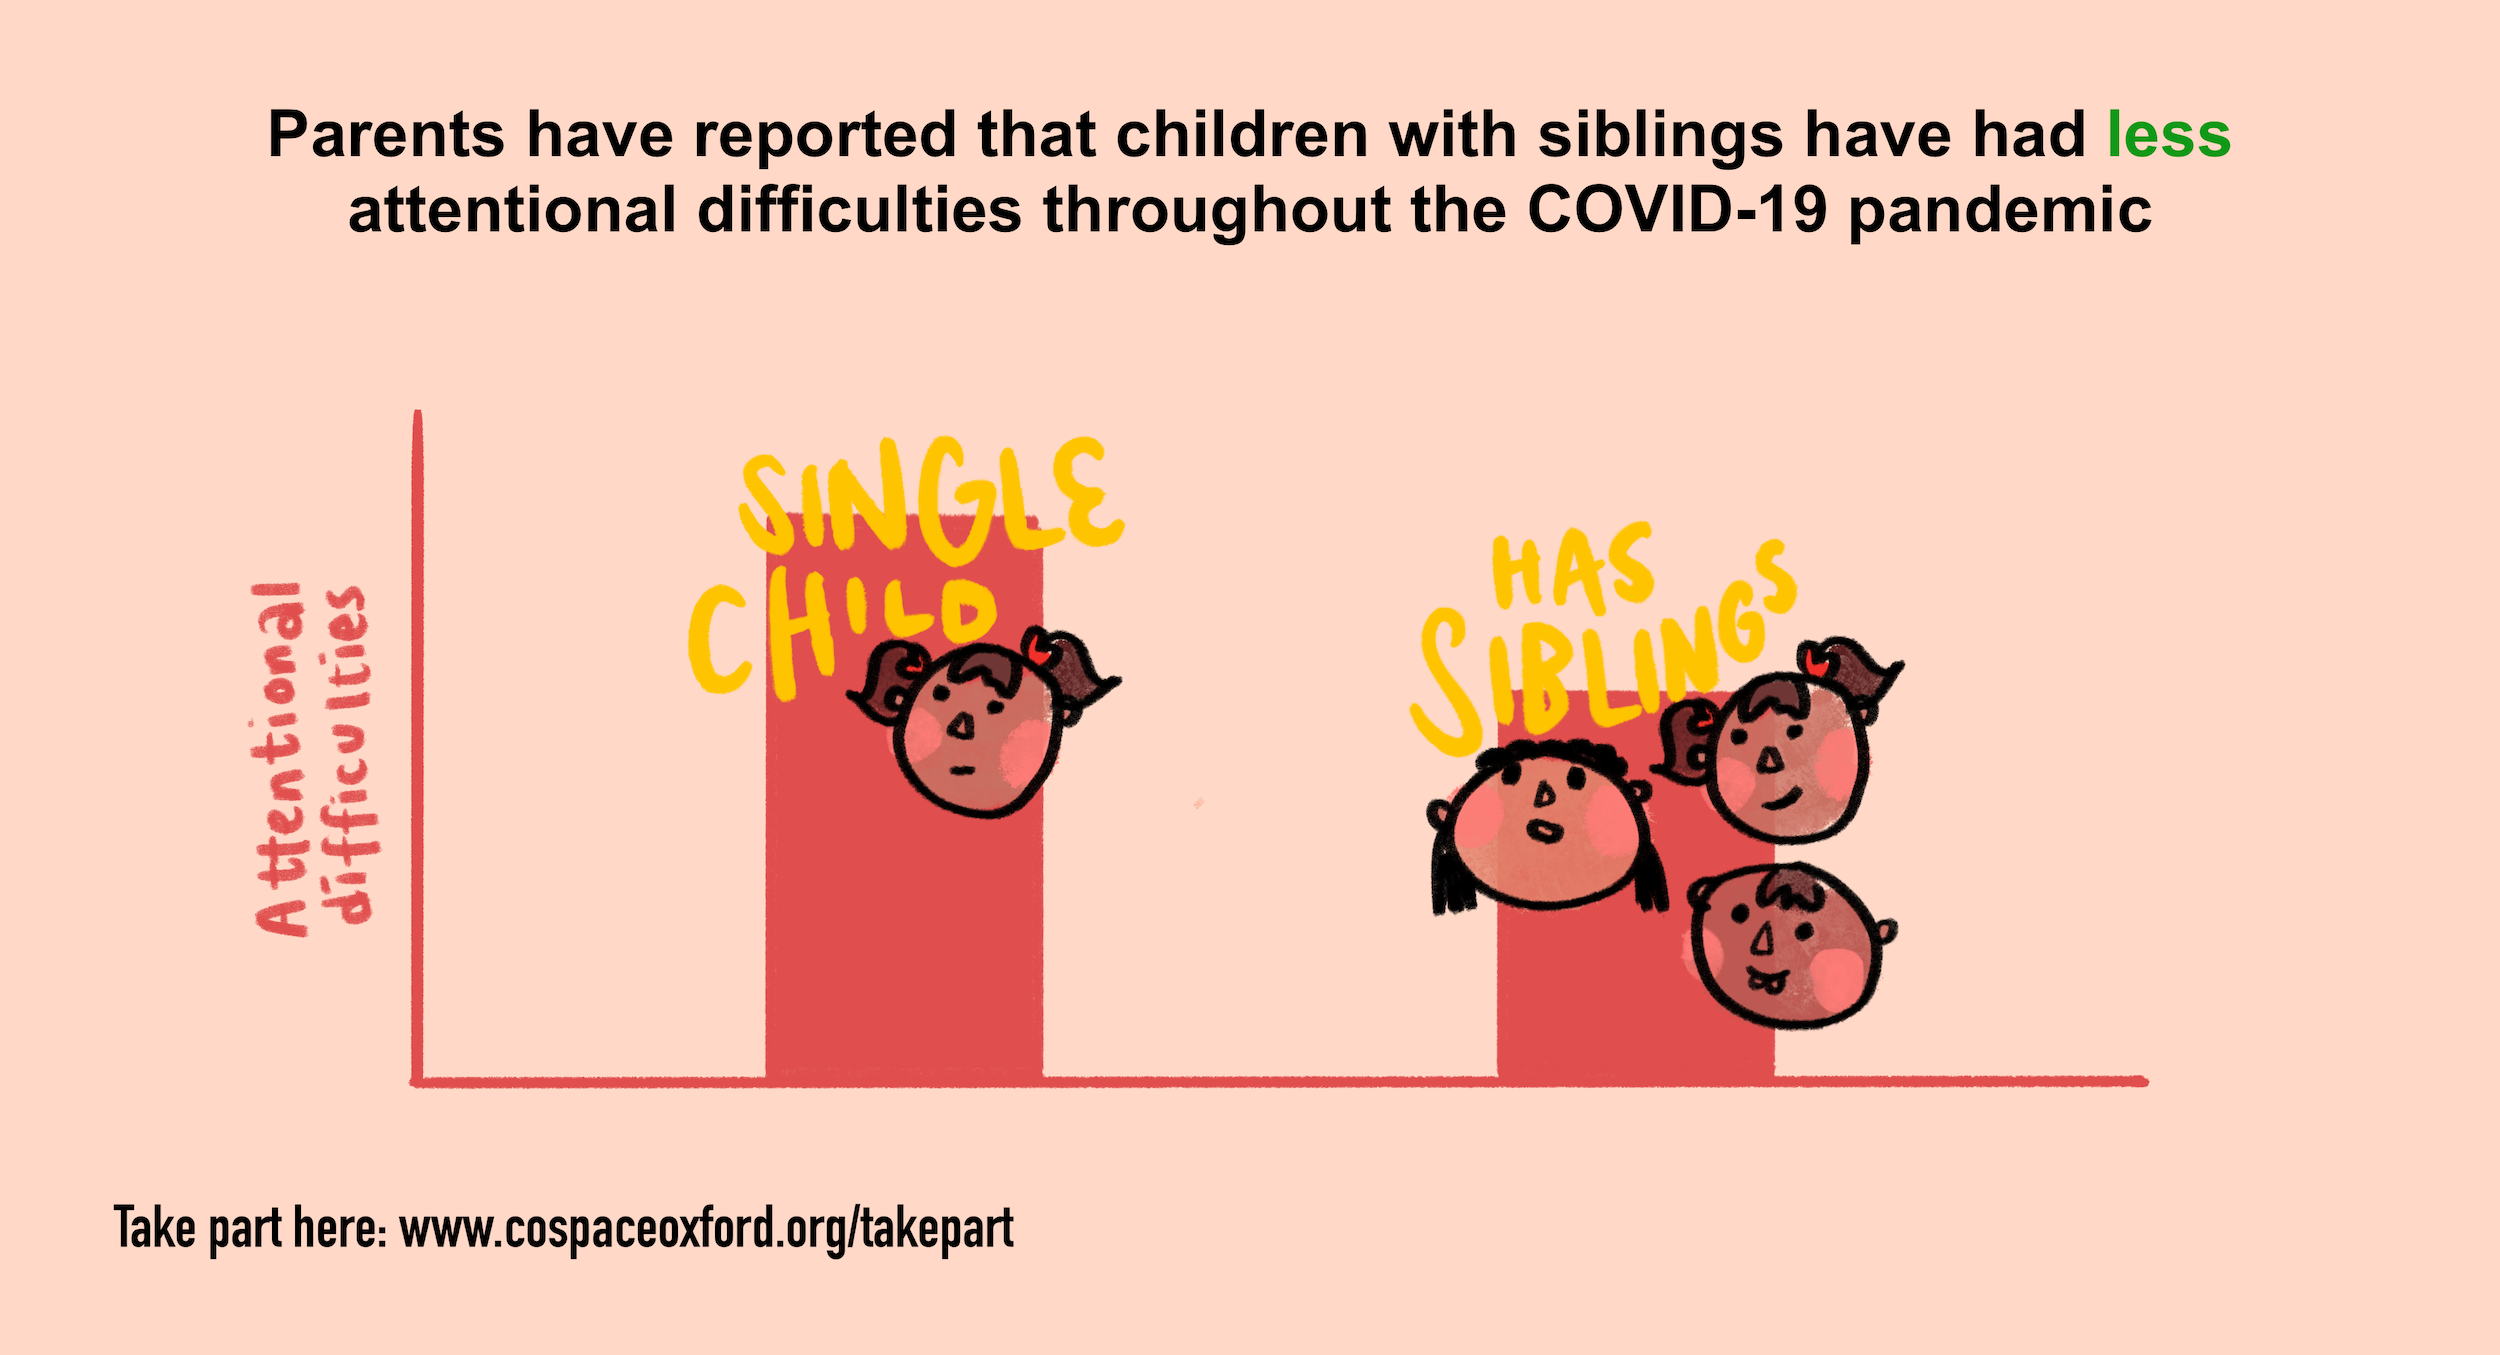 Infographic showing that parents have reported that children with siblings have ahd less attentional difficulties throughout the pandemic